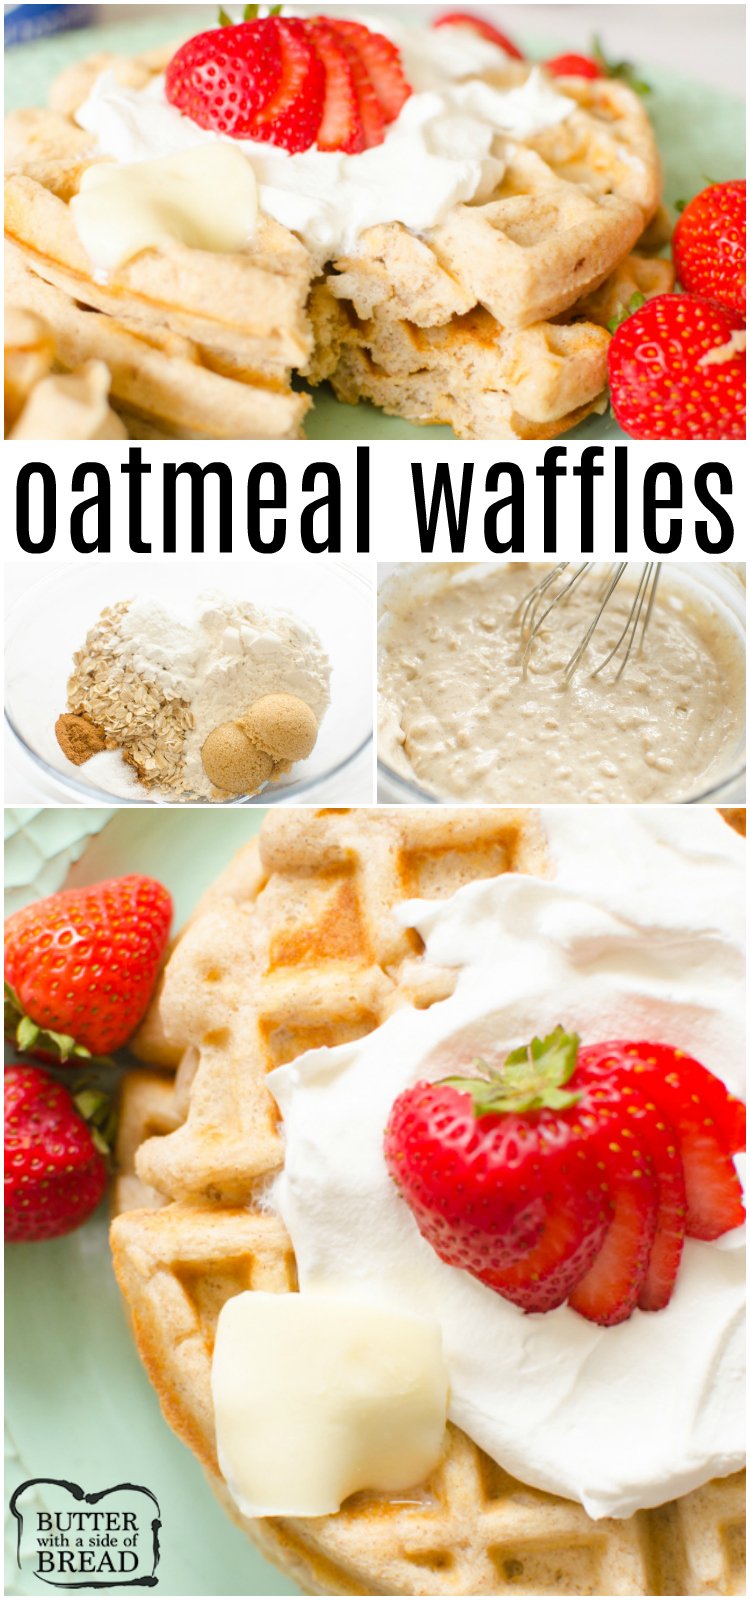 Oatmeal Waffles made fresh for breakfast with oats, cinnamon and several other basic ingredients that you likely have on hand. This oatmeal waffle recipe can be topped with berries, bananas and whipped cream for a delicious and hearty breakfast with lots of nutrition and flavor! 